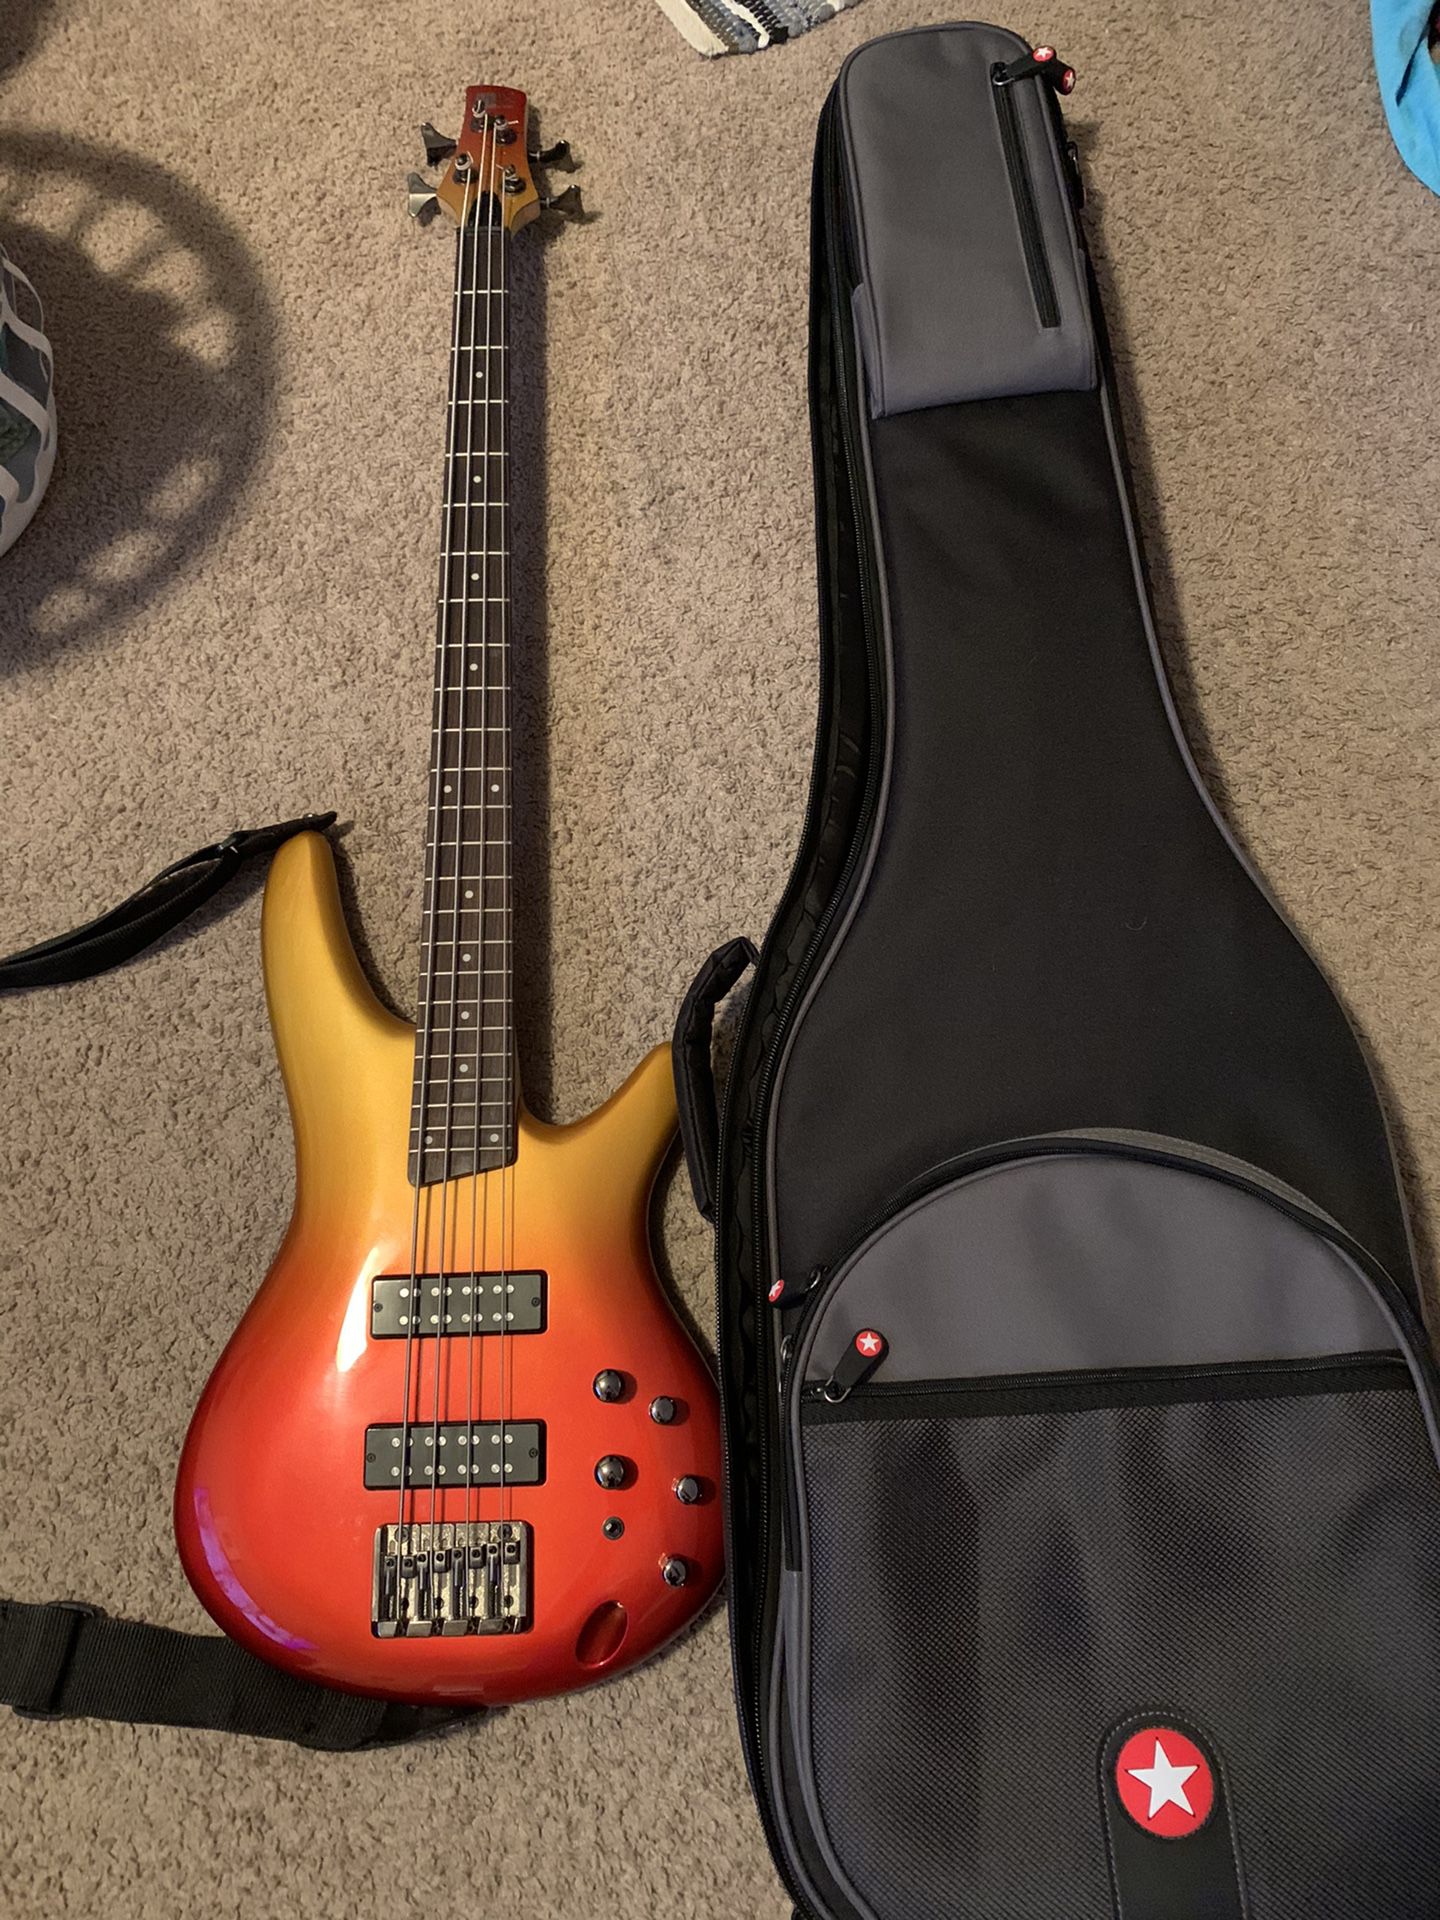 Ibanez soundgear 3000 4 strong bass with road runner gig bag brand new $300